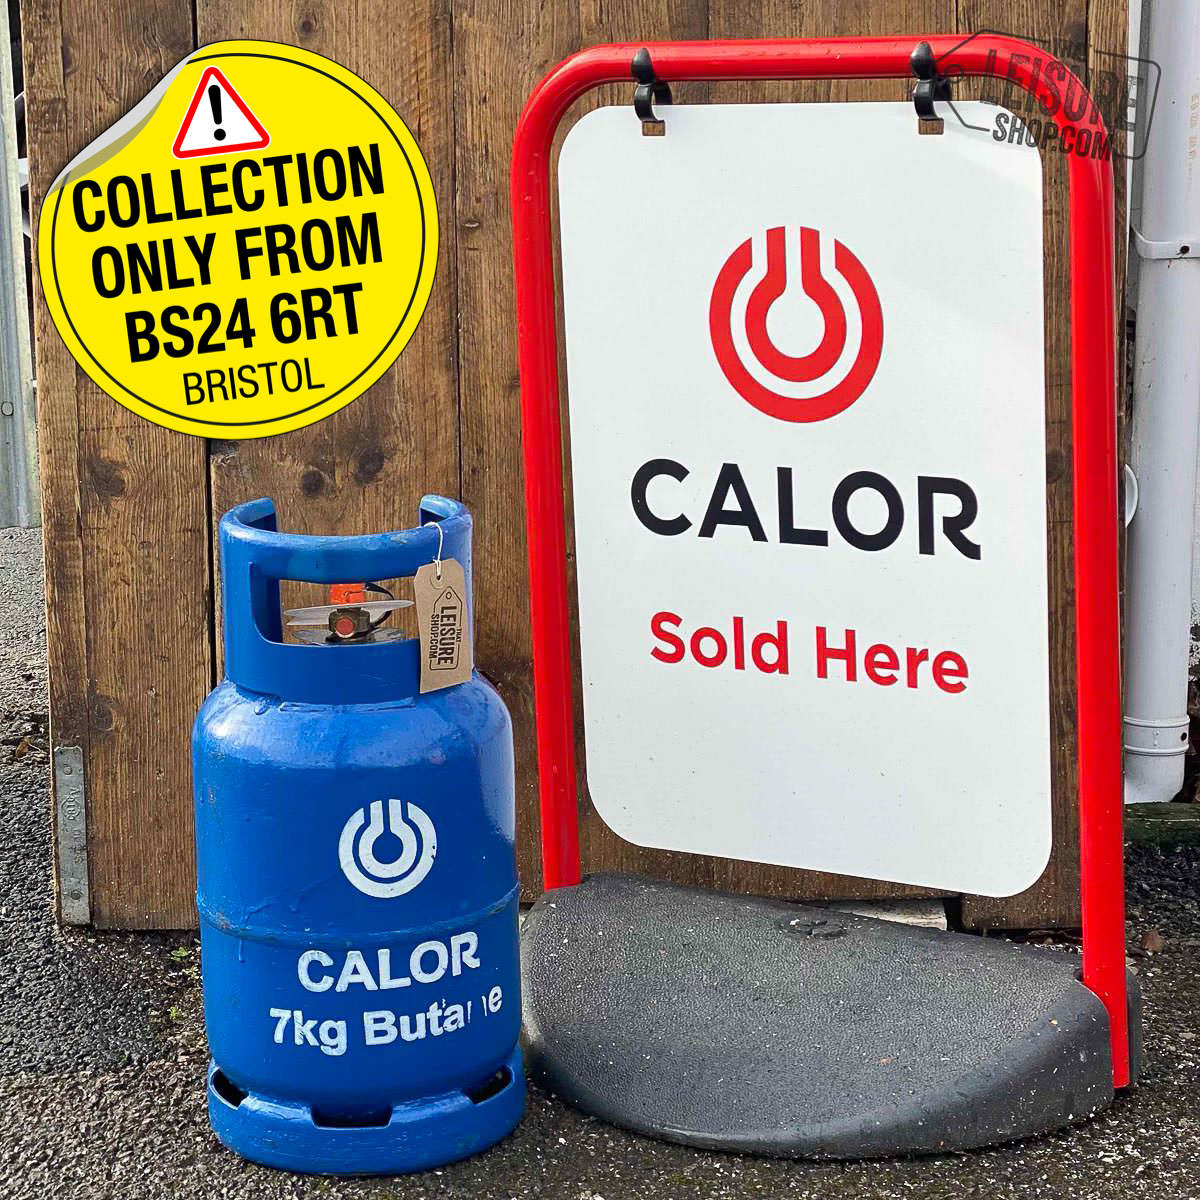 Calor 7kg Butane Gas Bottle - COLLECTION ONLY - Free Shipping Over